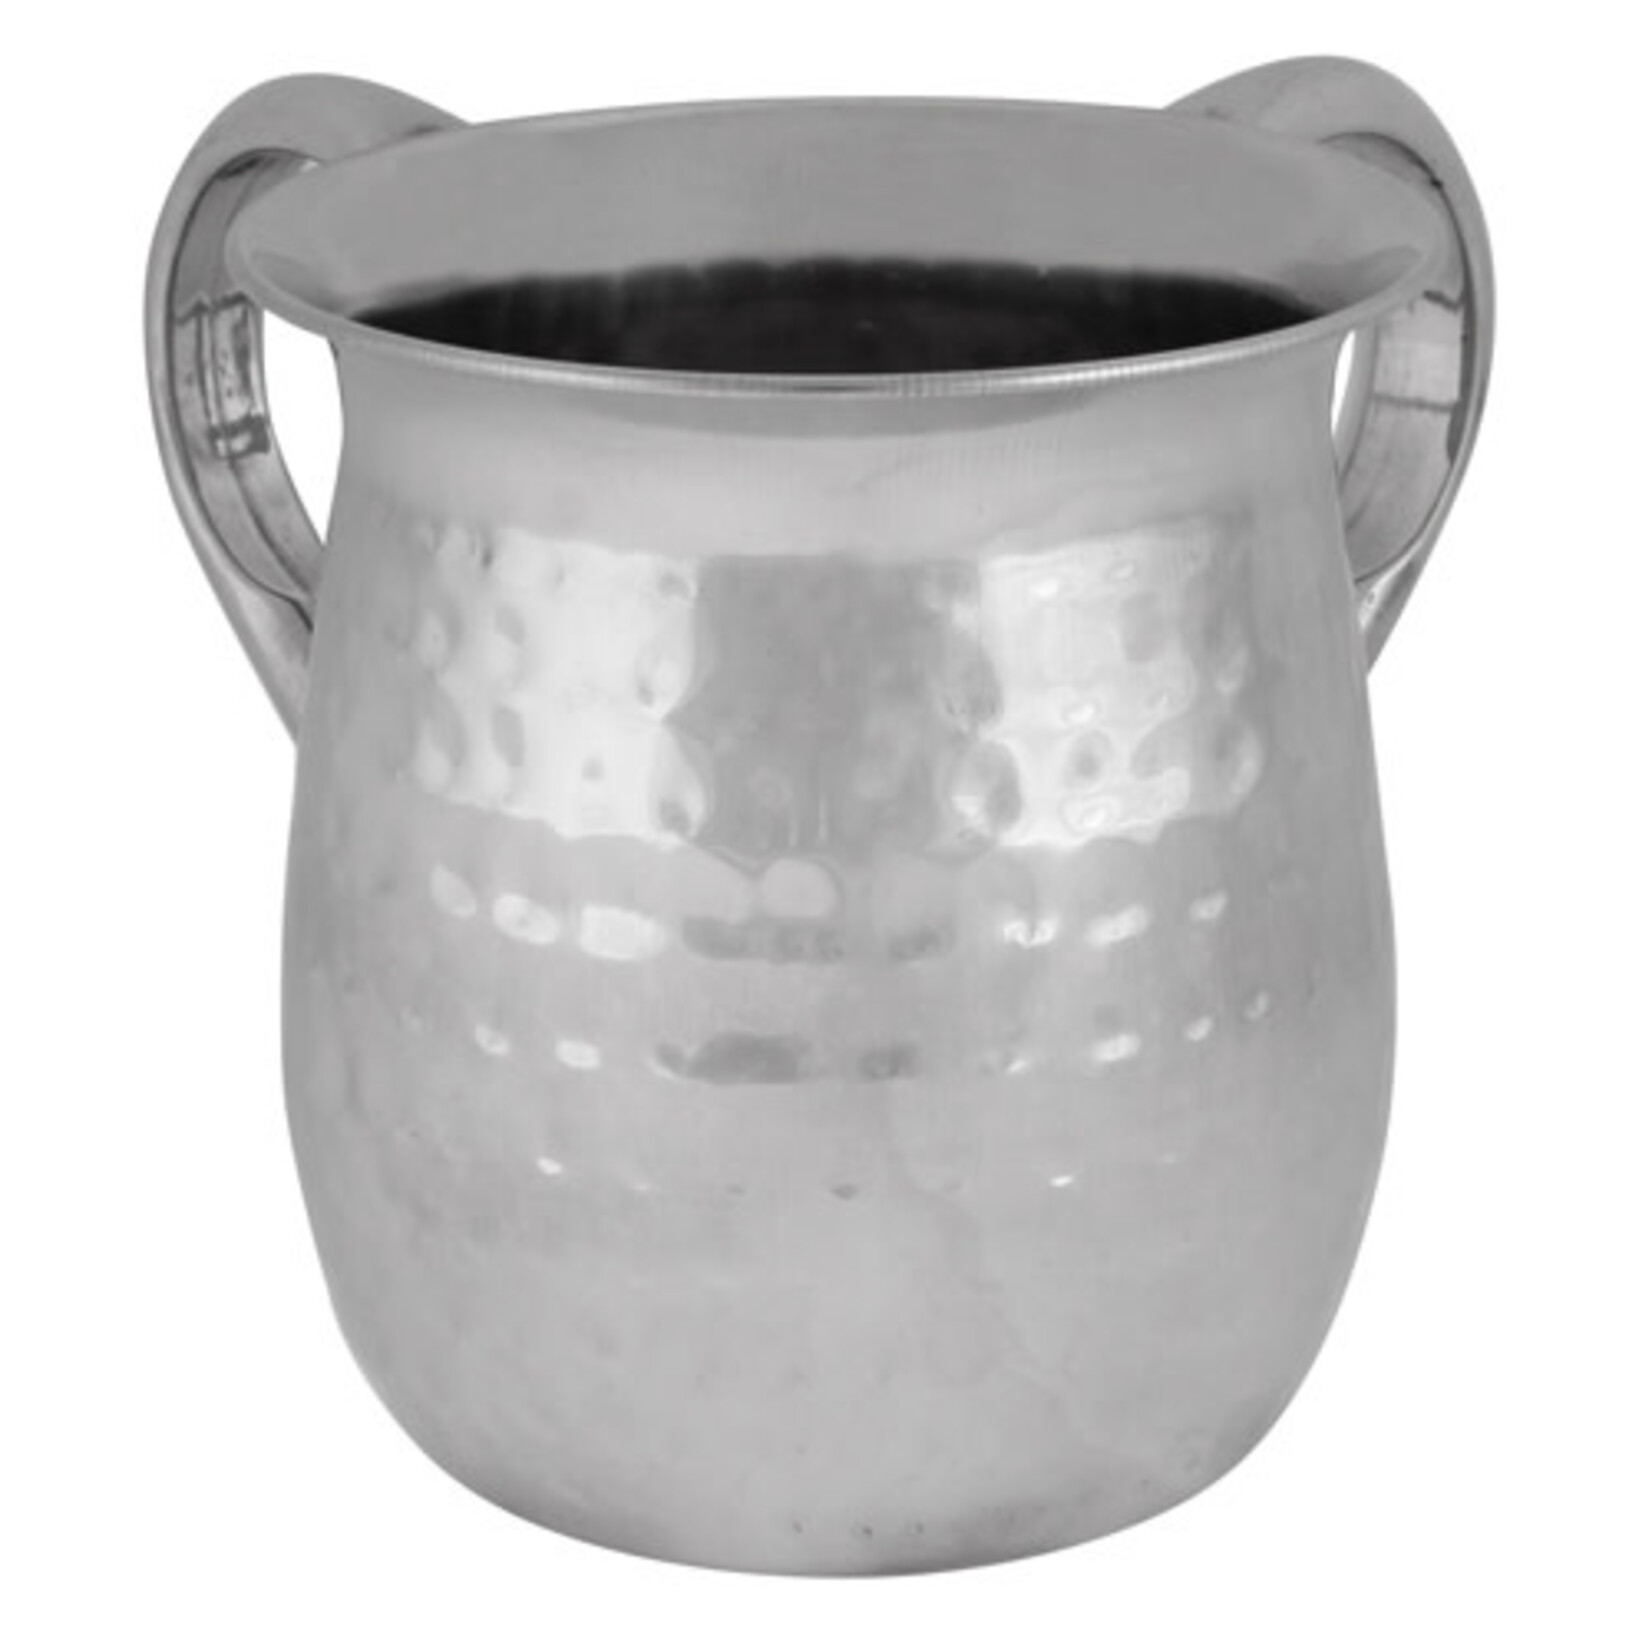 Washing Cup, Stainless Steel with Hammered Effect